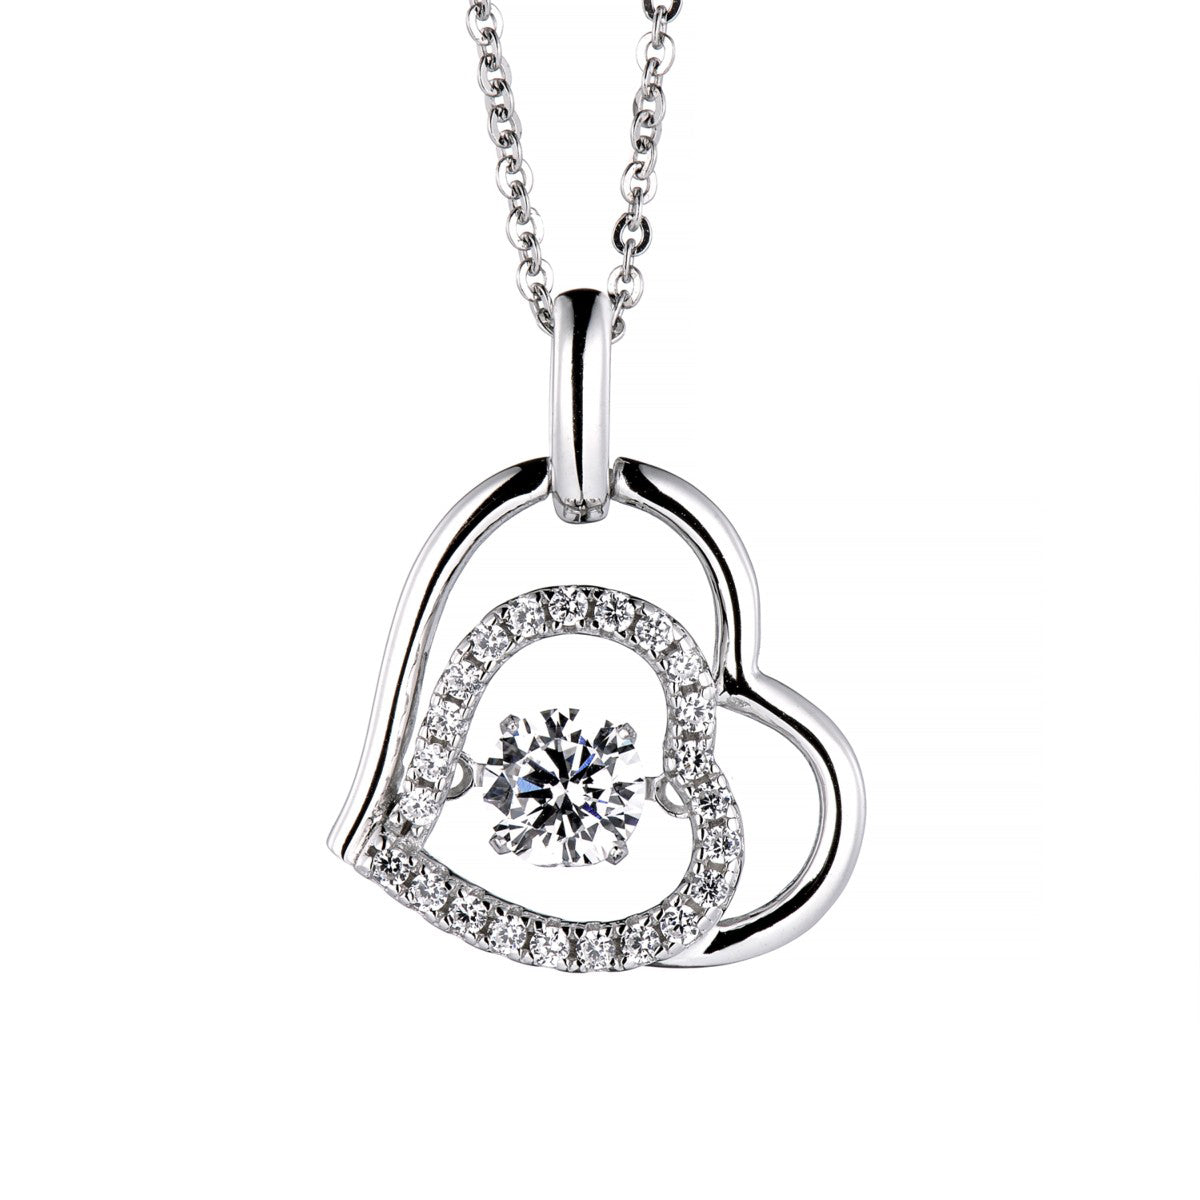 Beating heart 925 sterling silver necklace